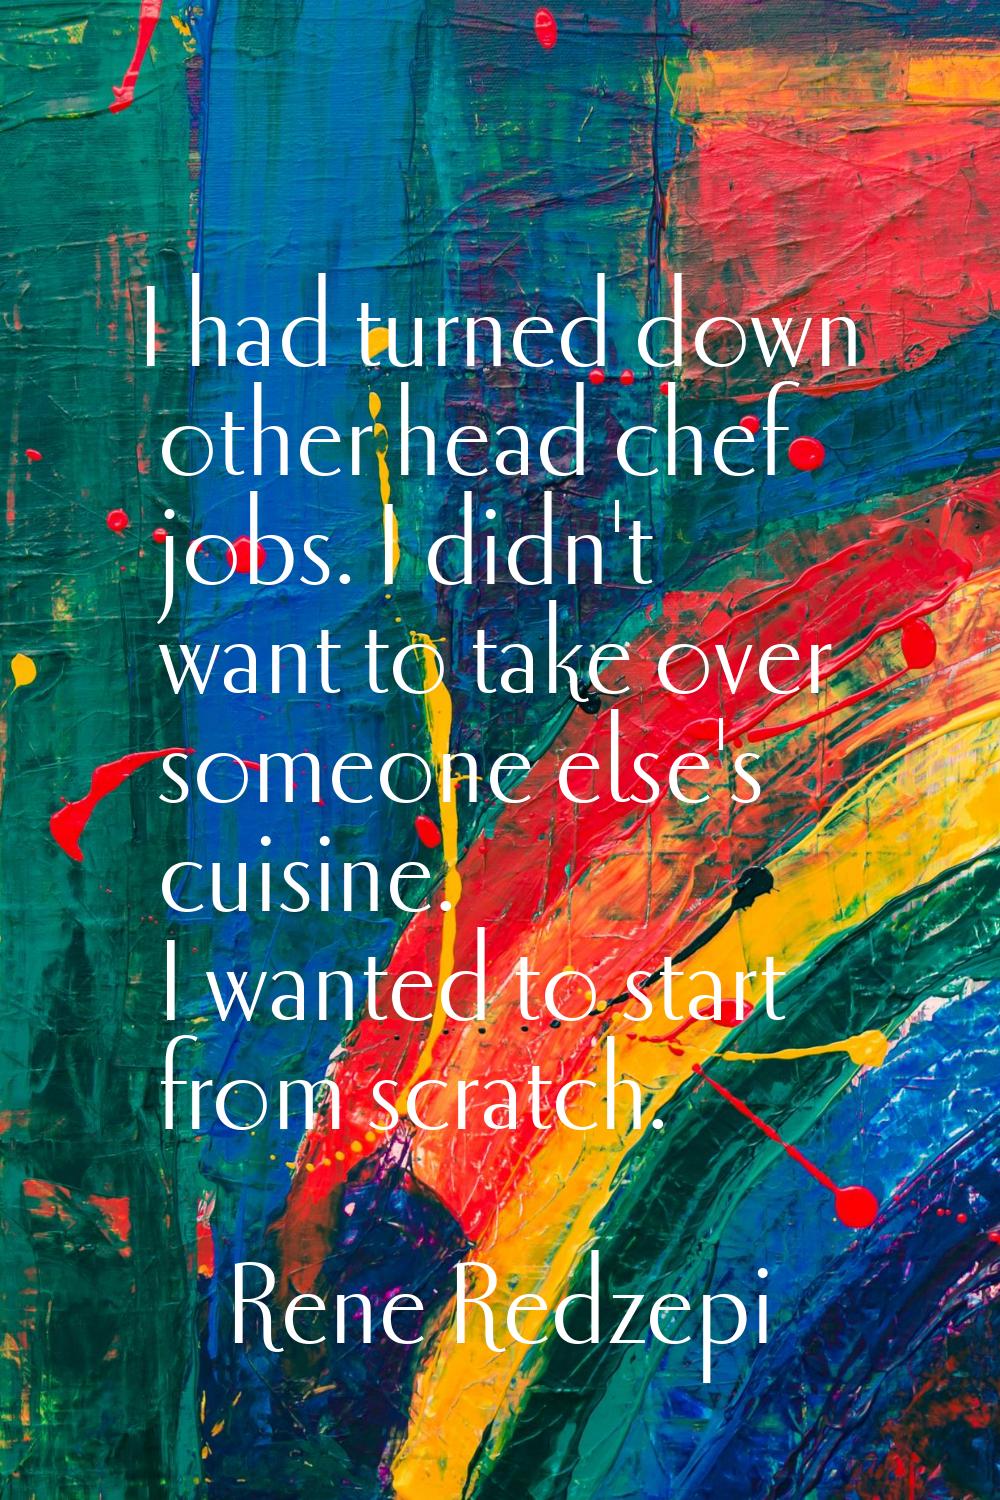 I had turned down other head chef jobs. I didn't want to take over someone else's cuisine. I wanted